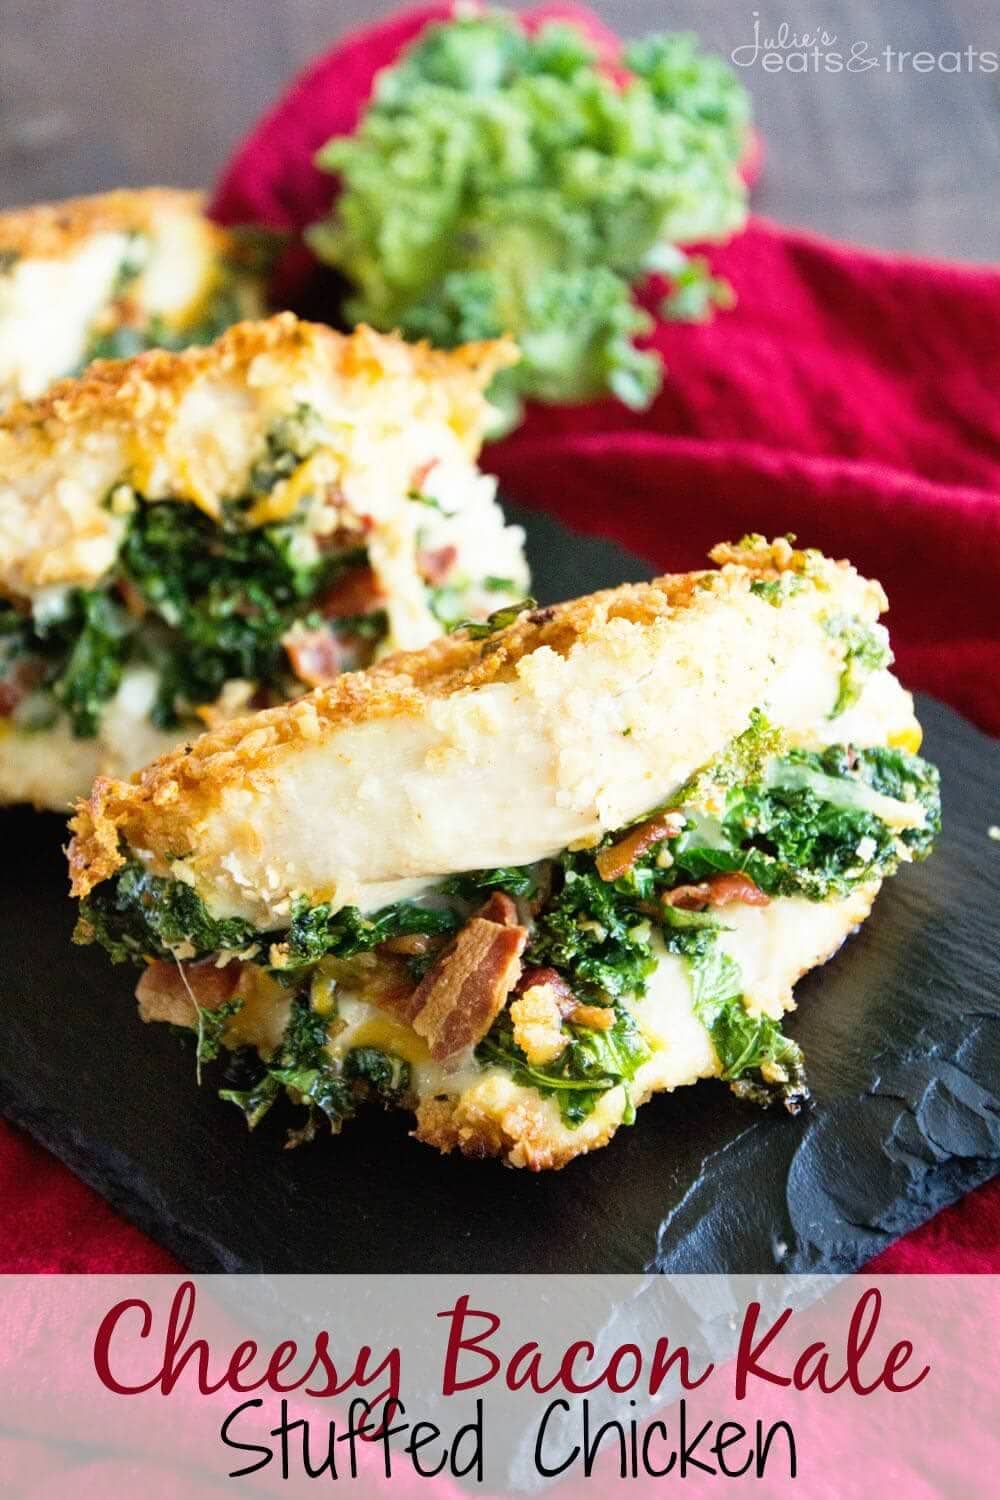 Cheesy Bacon Kale Stuffed Chicken ~ Delicious, Tender Chicken Breasts Stuffed with Cheese, Bacon and Kale! Quick, Easy and Delicious Recipe!